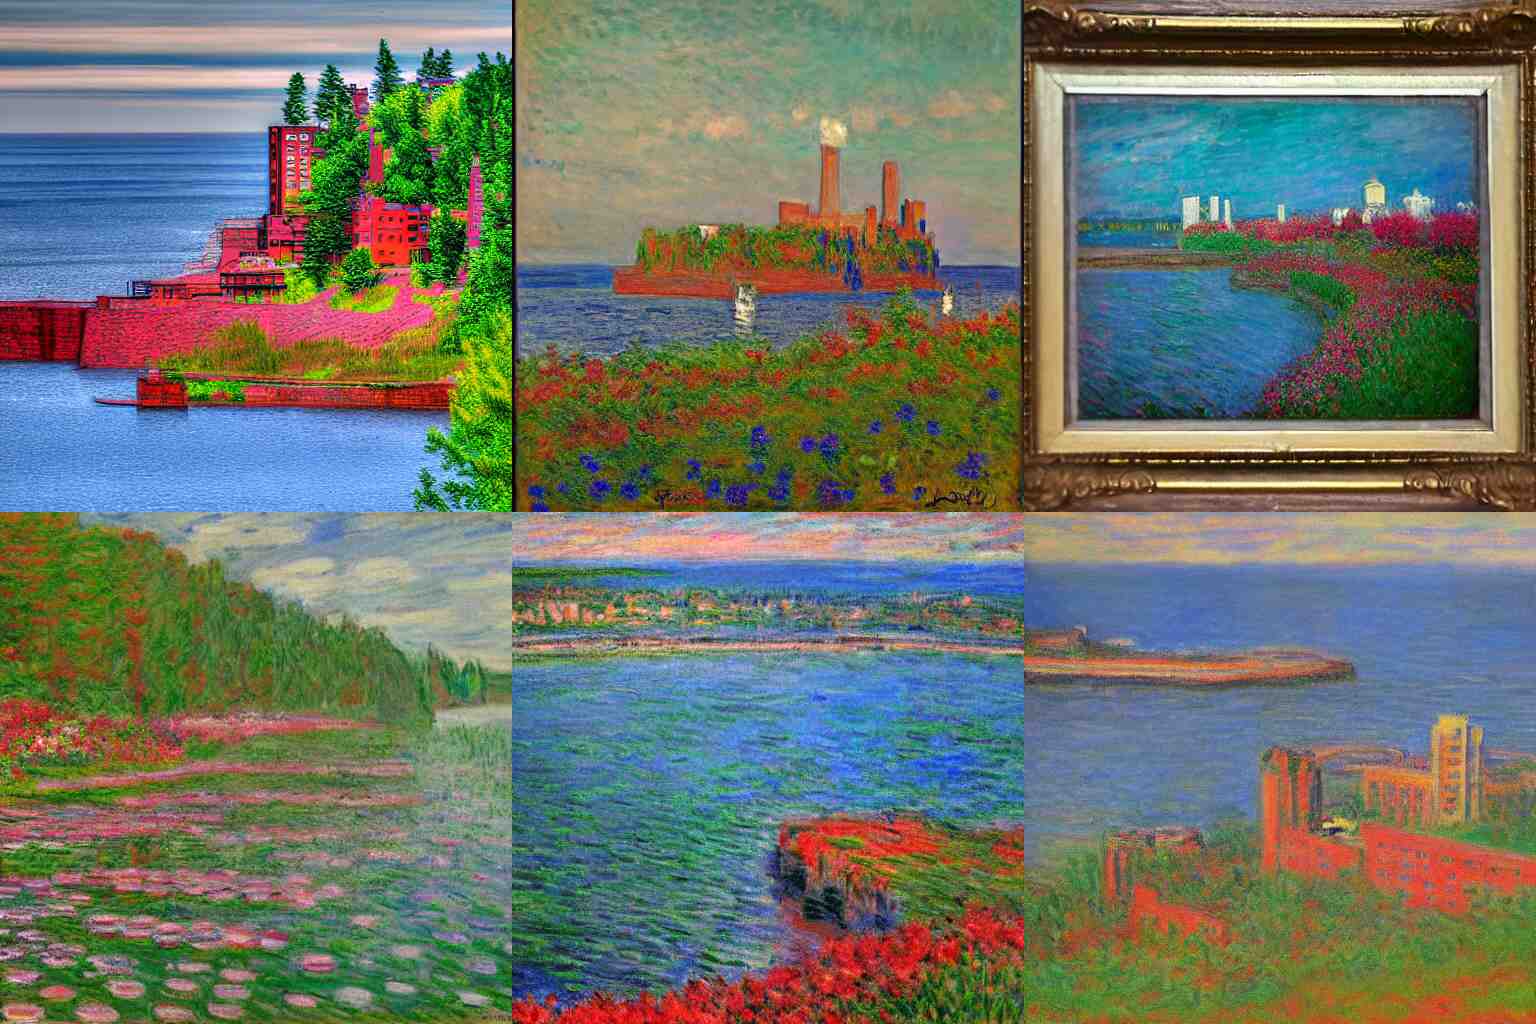 How To Get Watermark-Free Images With A Machine Learning API